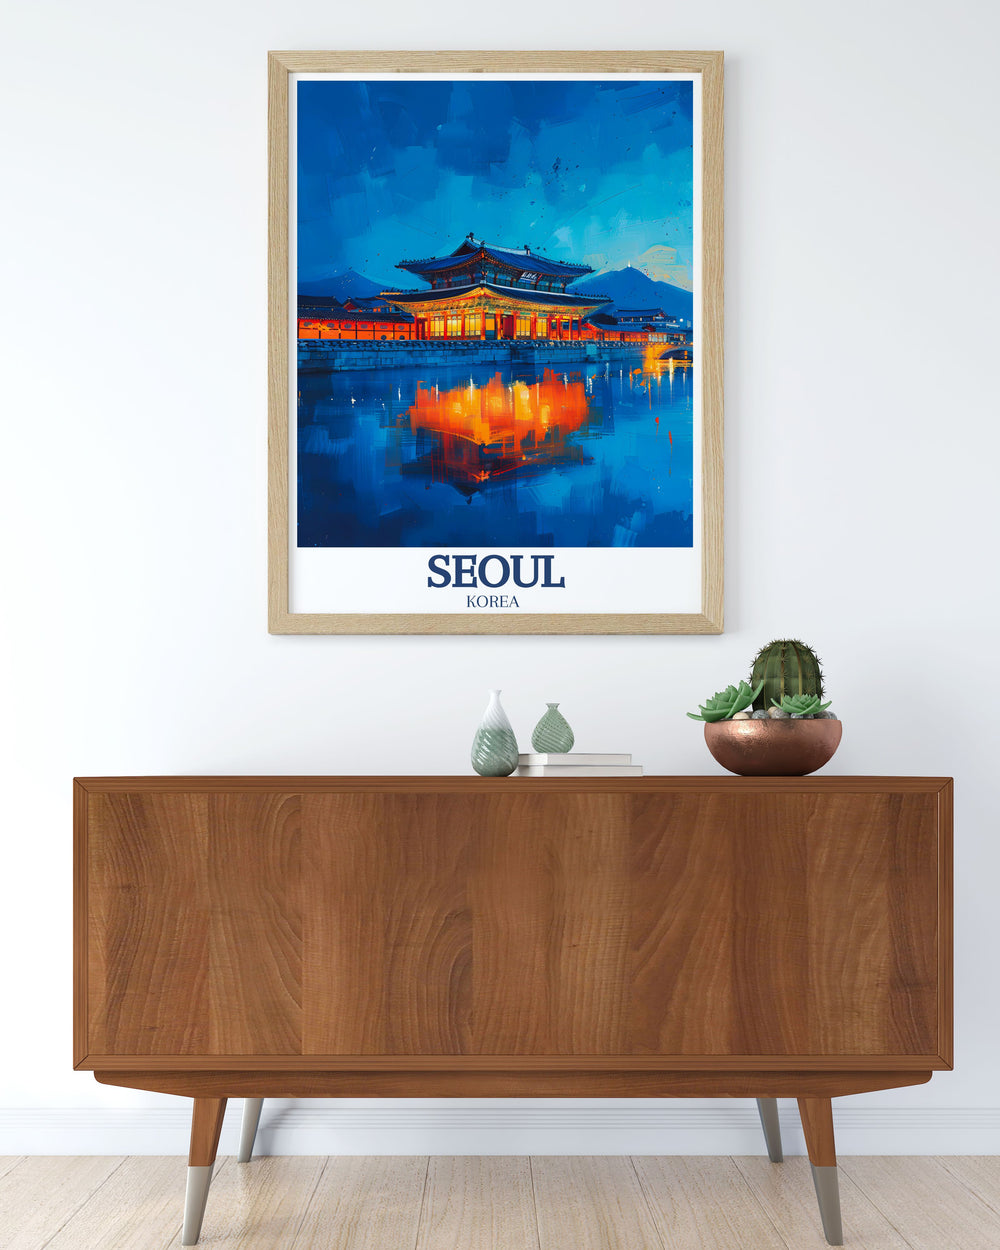 Stunning Seoul Art Print of Gyeongbokgung Palace and Han River an elegant addition to any wall decor capturing the essence of South Korea perfect for anniversary gifts birthday gifts and Christmas gifts bringing the beauty of Seoul into your home